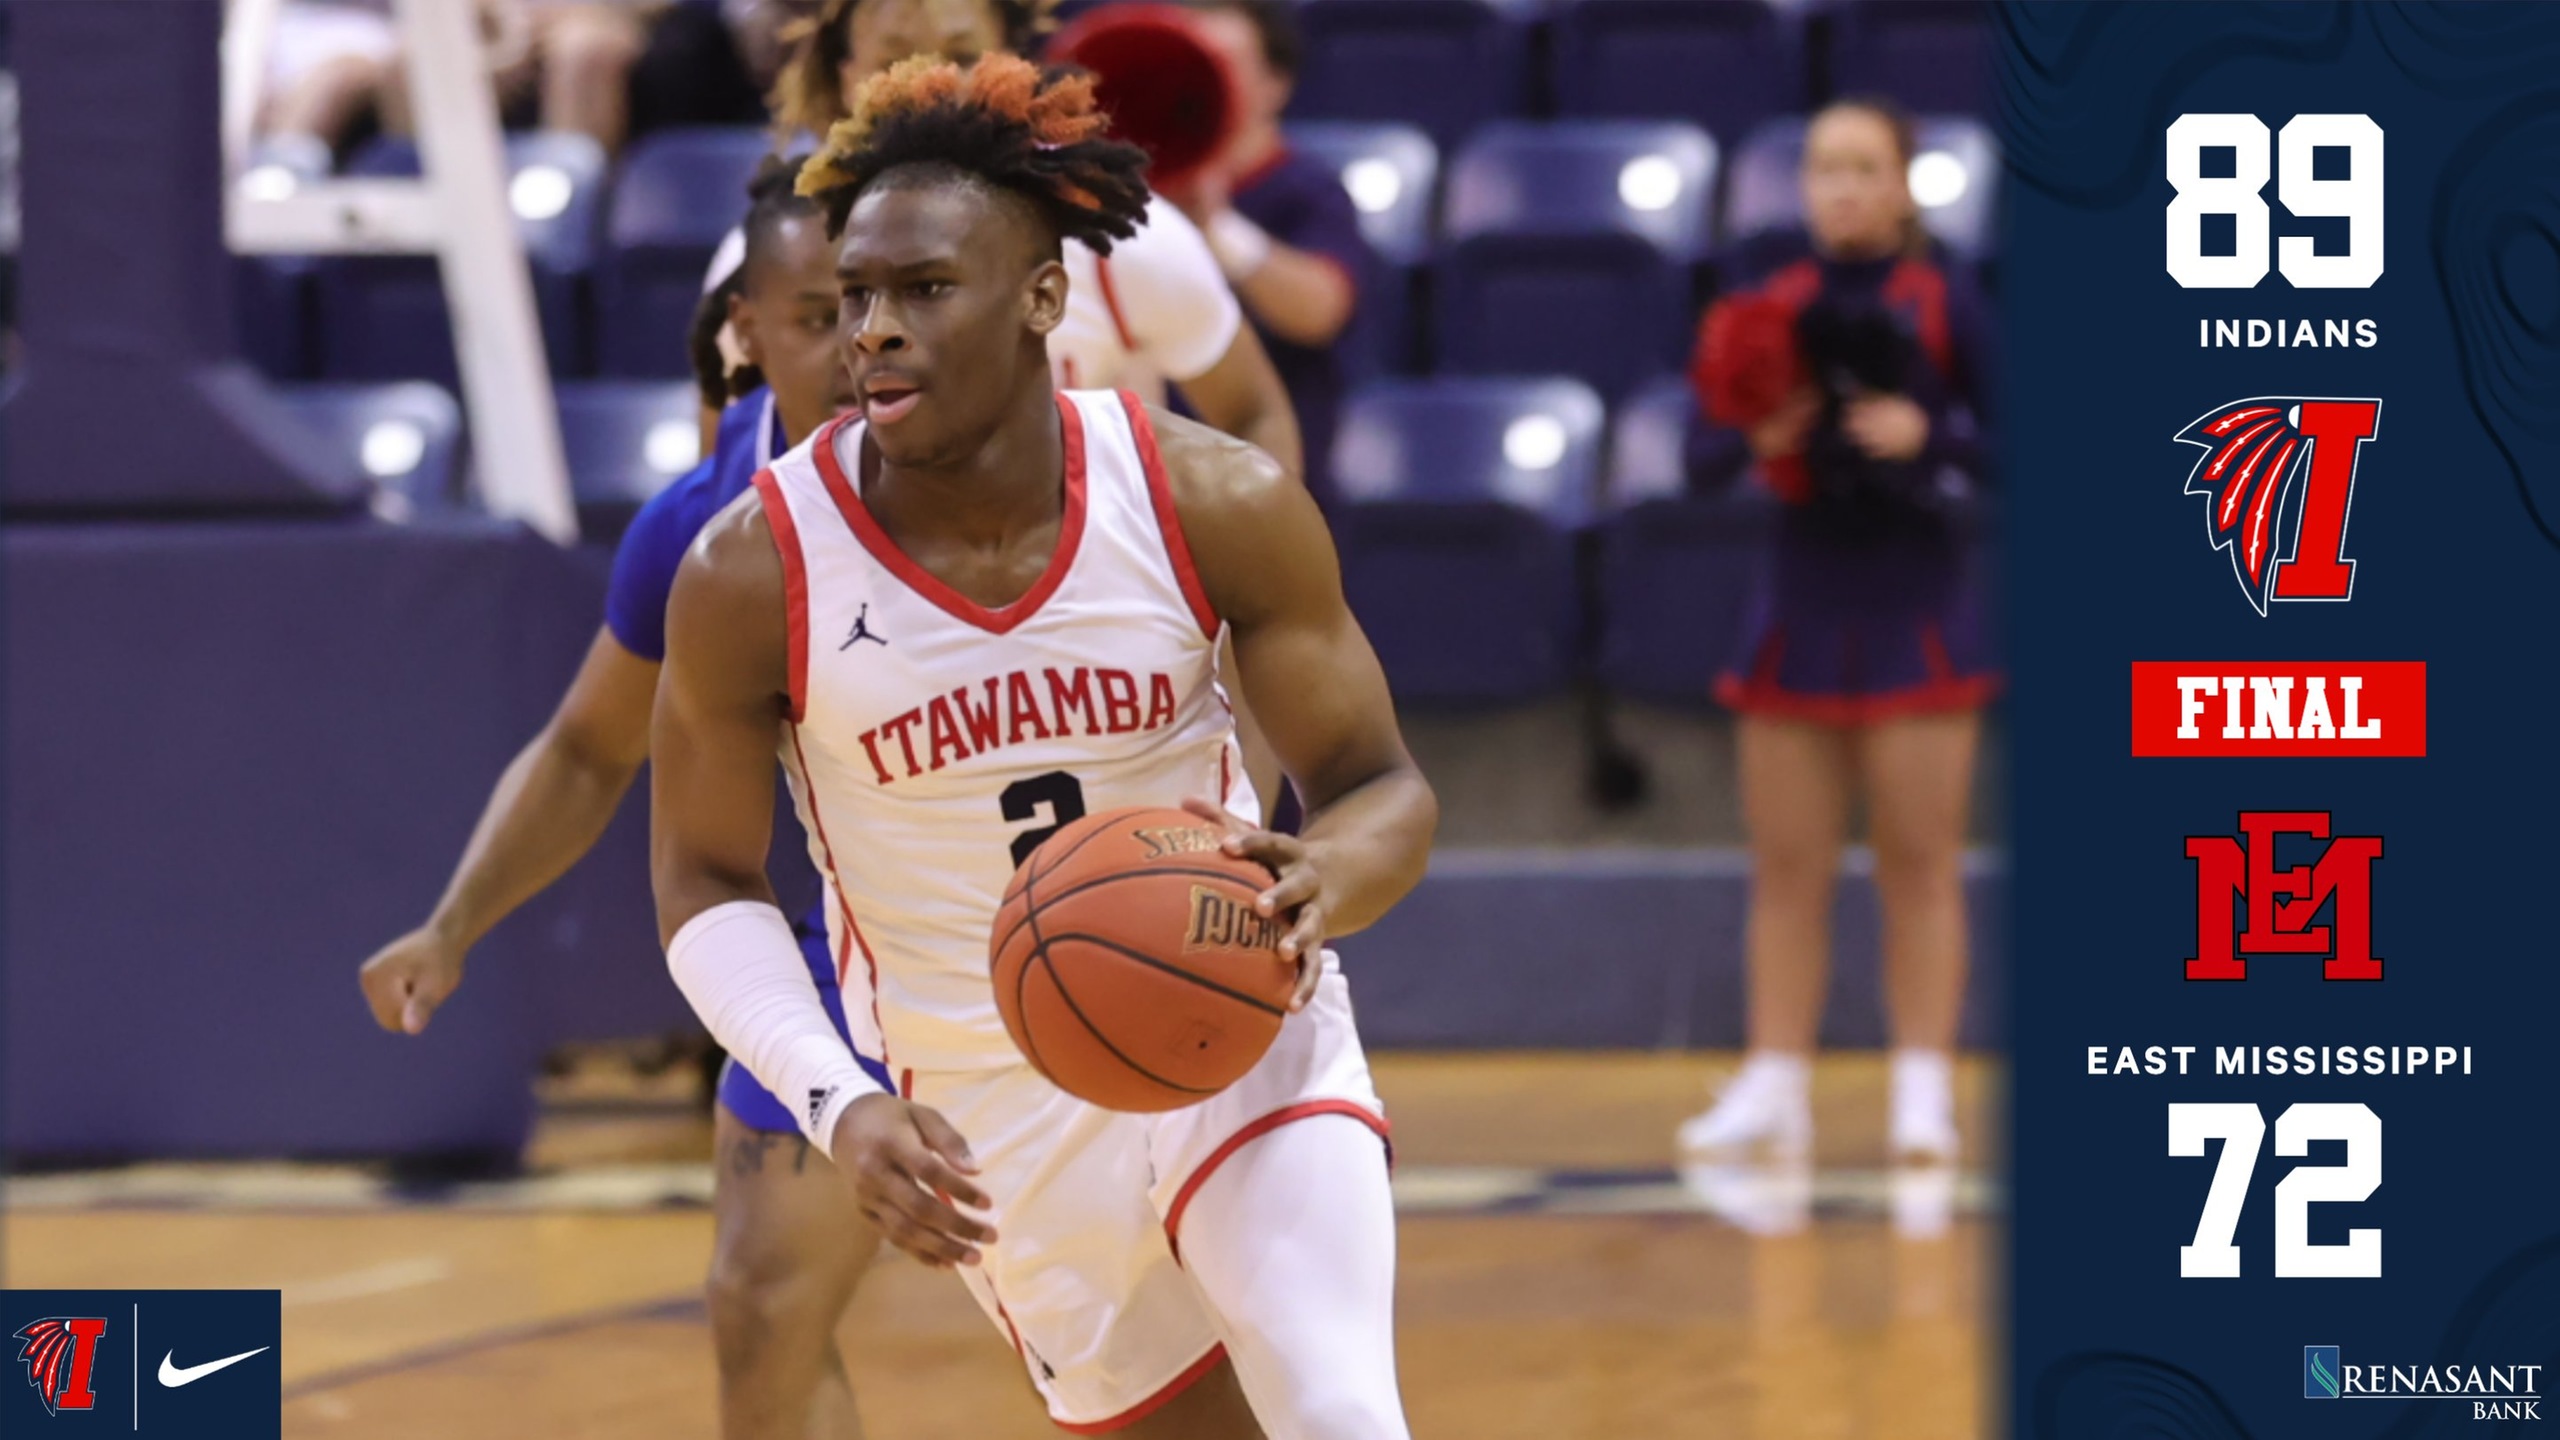 Indians close regular season with 89-72 win at East Mississippi